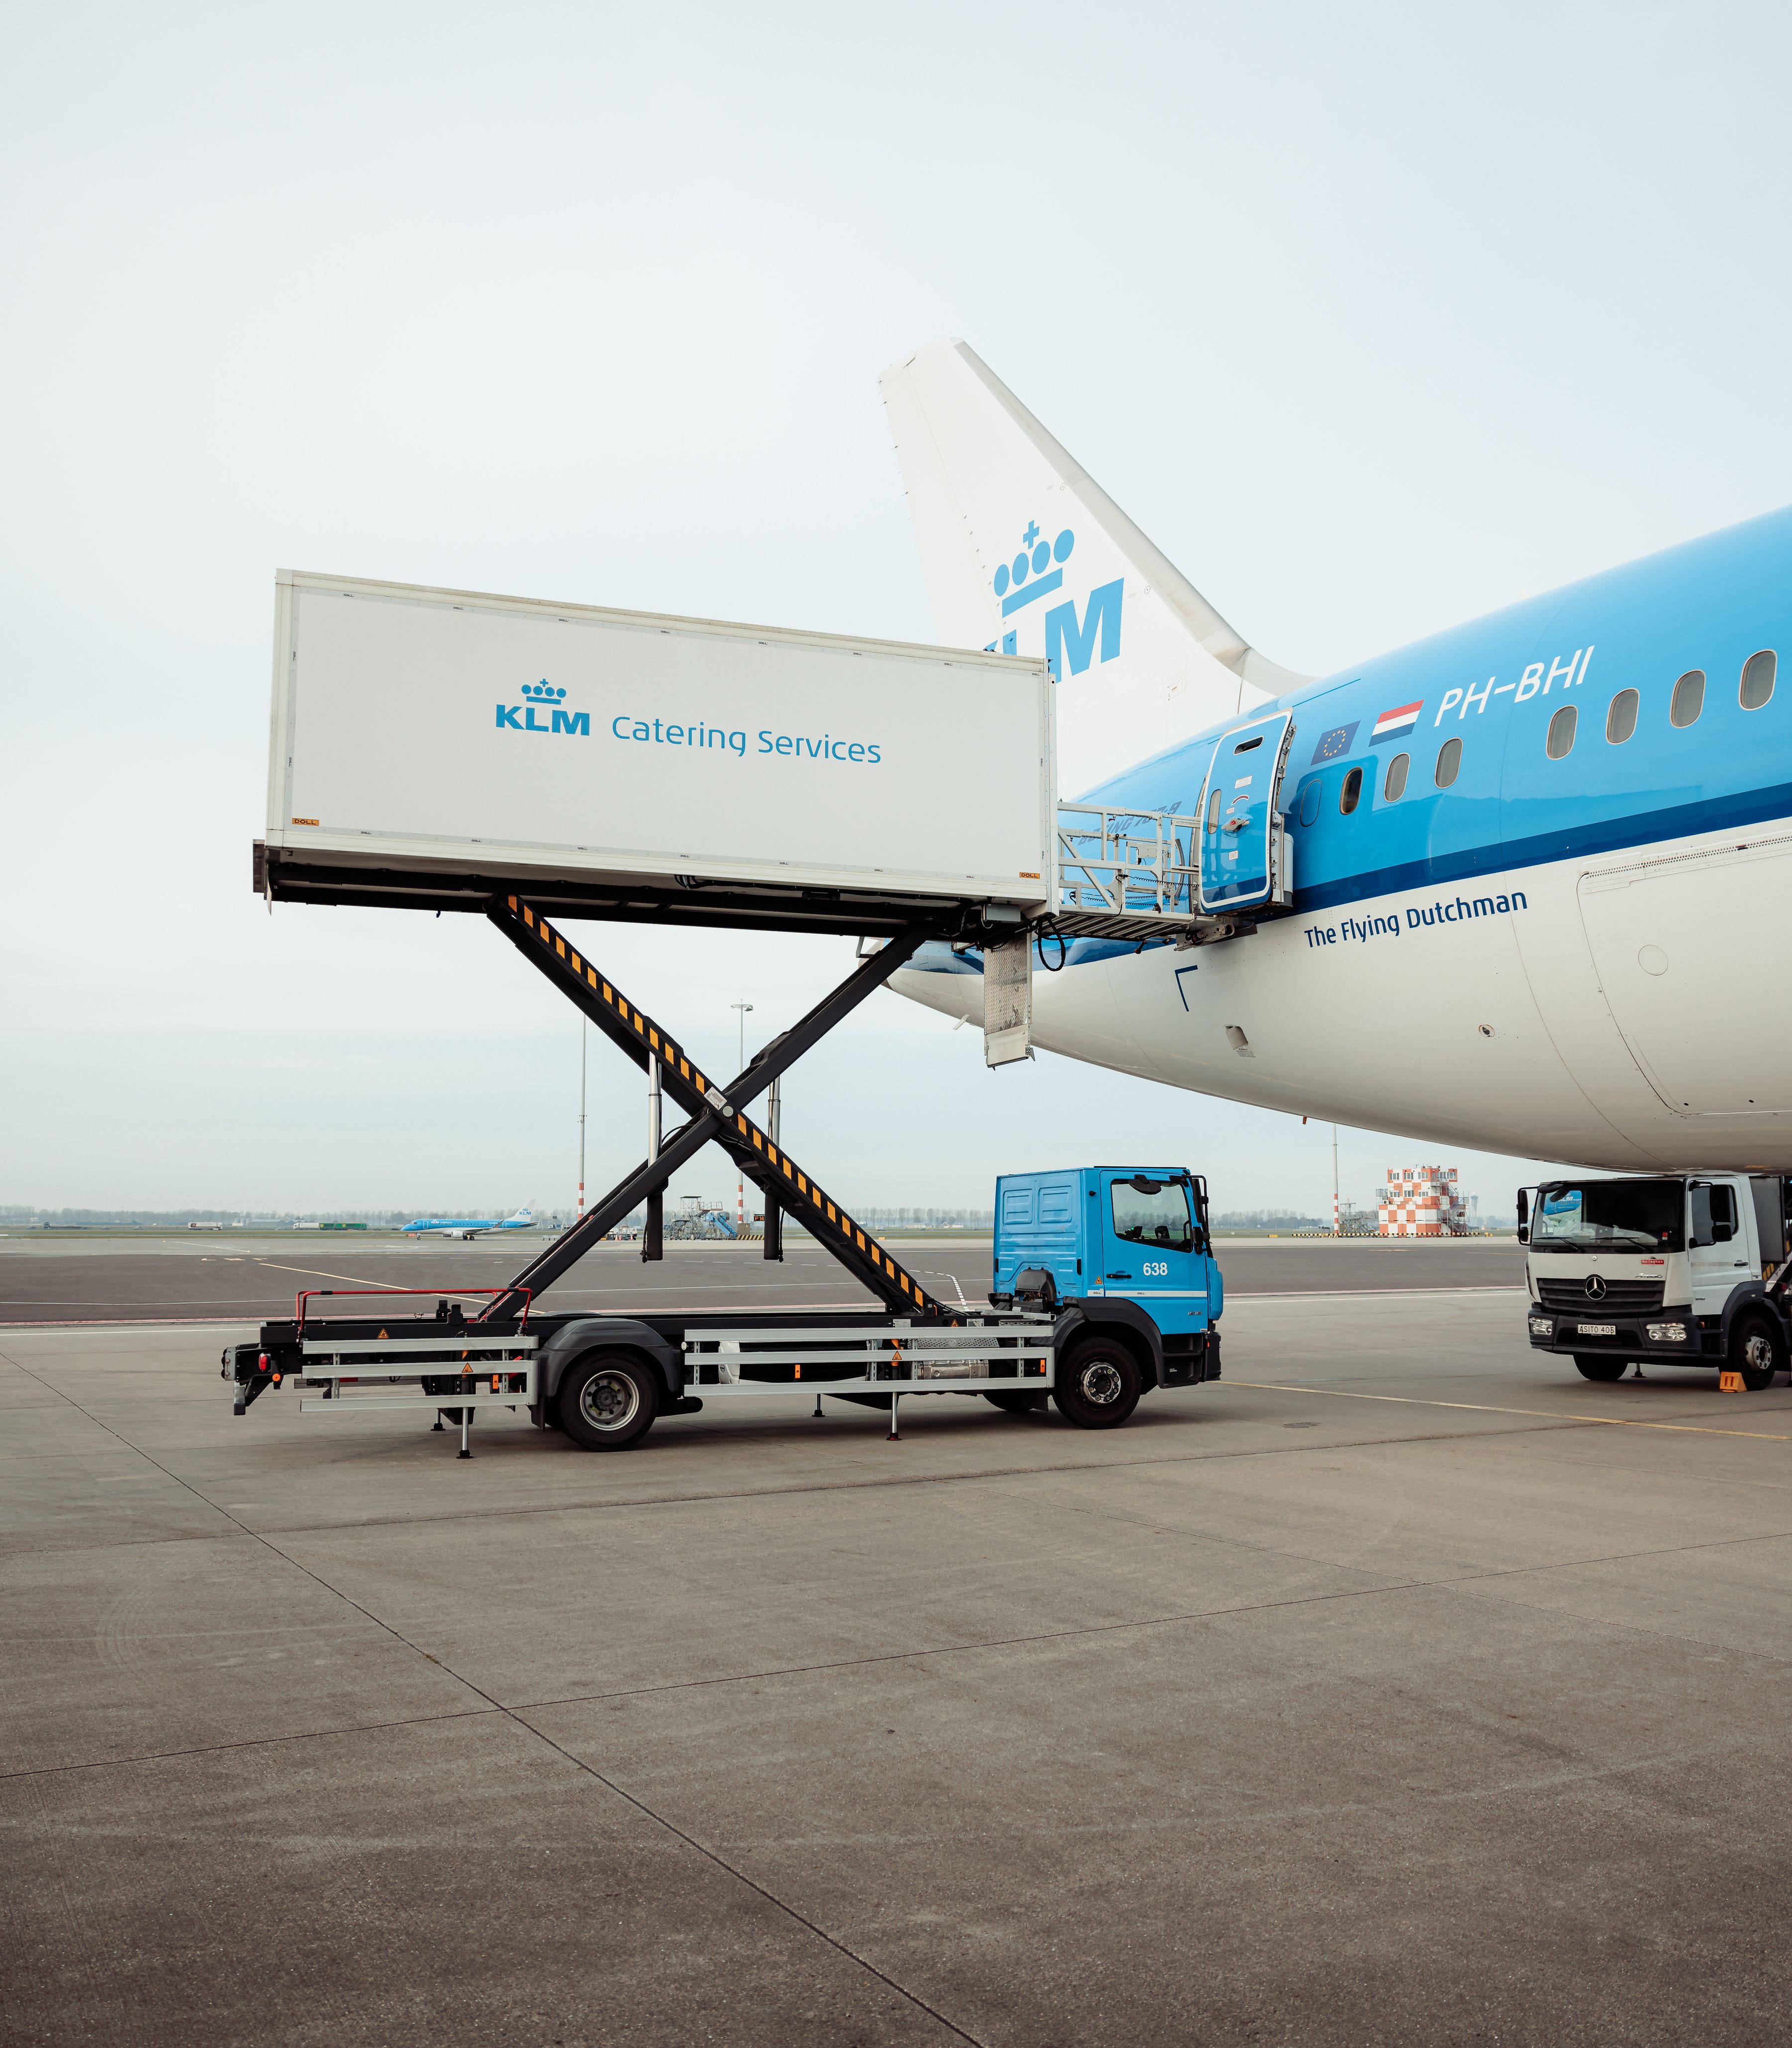 Catering services resupplying KLM plane